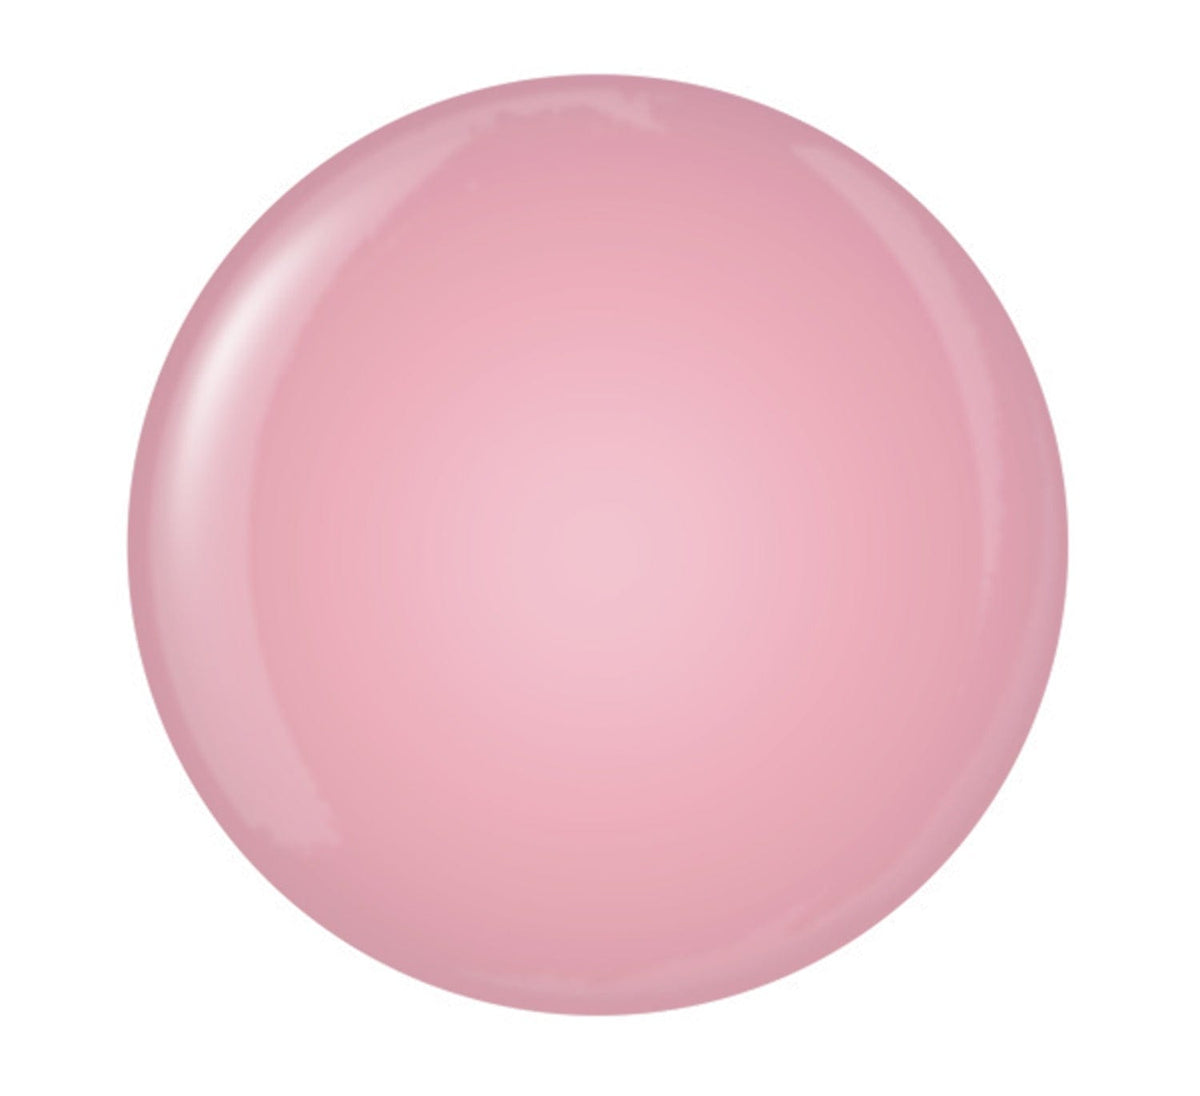 45g Speed Bubblegum Powder Nails - Young Nails - Luxe Pacifique